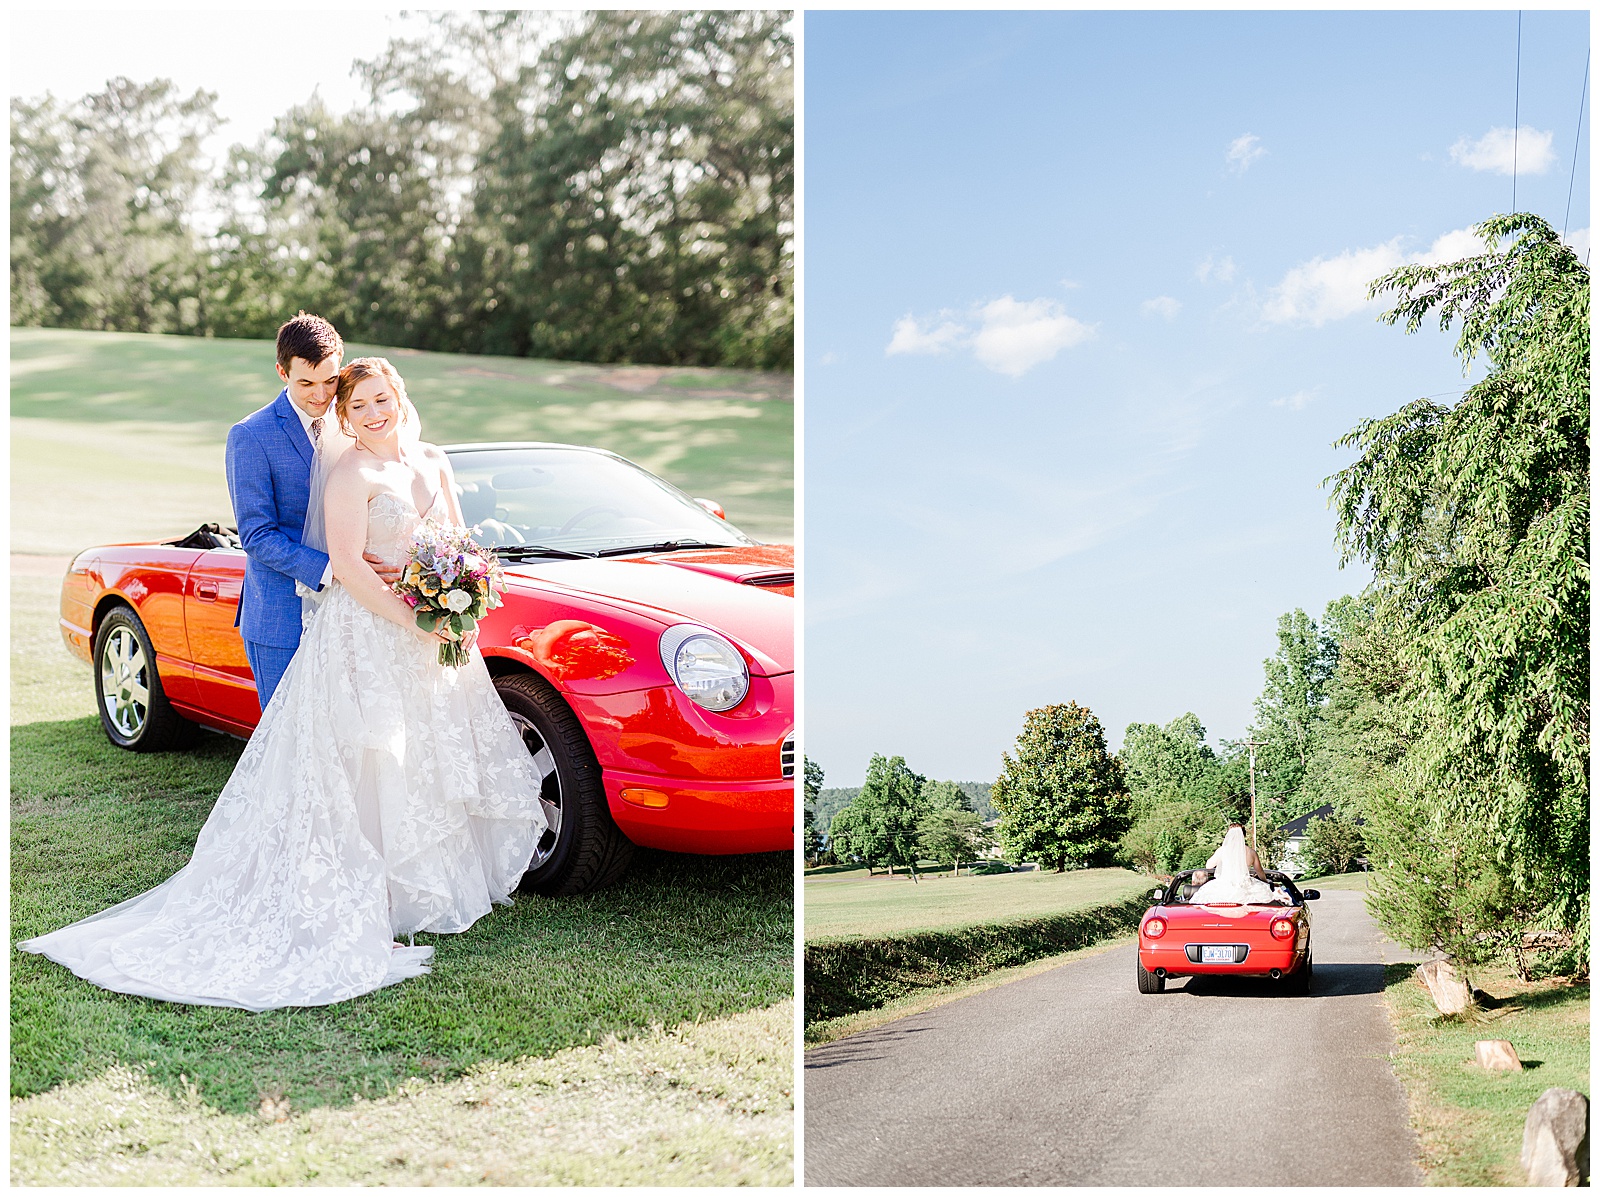 Bride and groom drive to reception in Red Ford Thunderbird from Outdoorsy Summer Wedding at North Carolina Lakehouse in the Mountains | check out the full wedding at KevynDixonPhoto.com